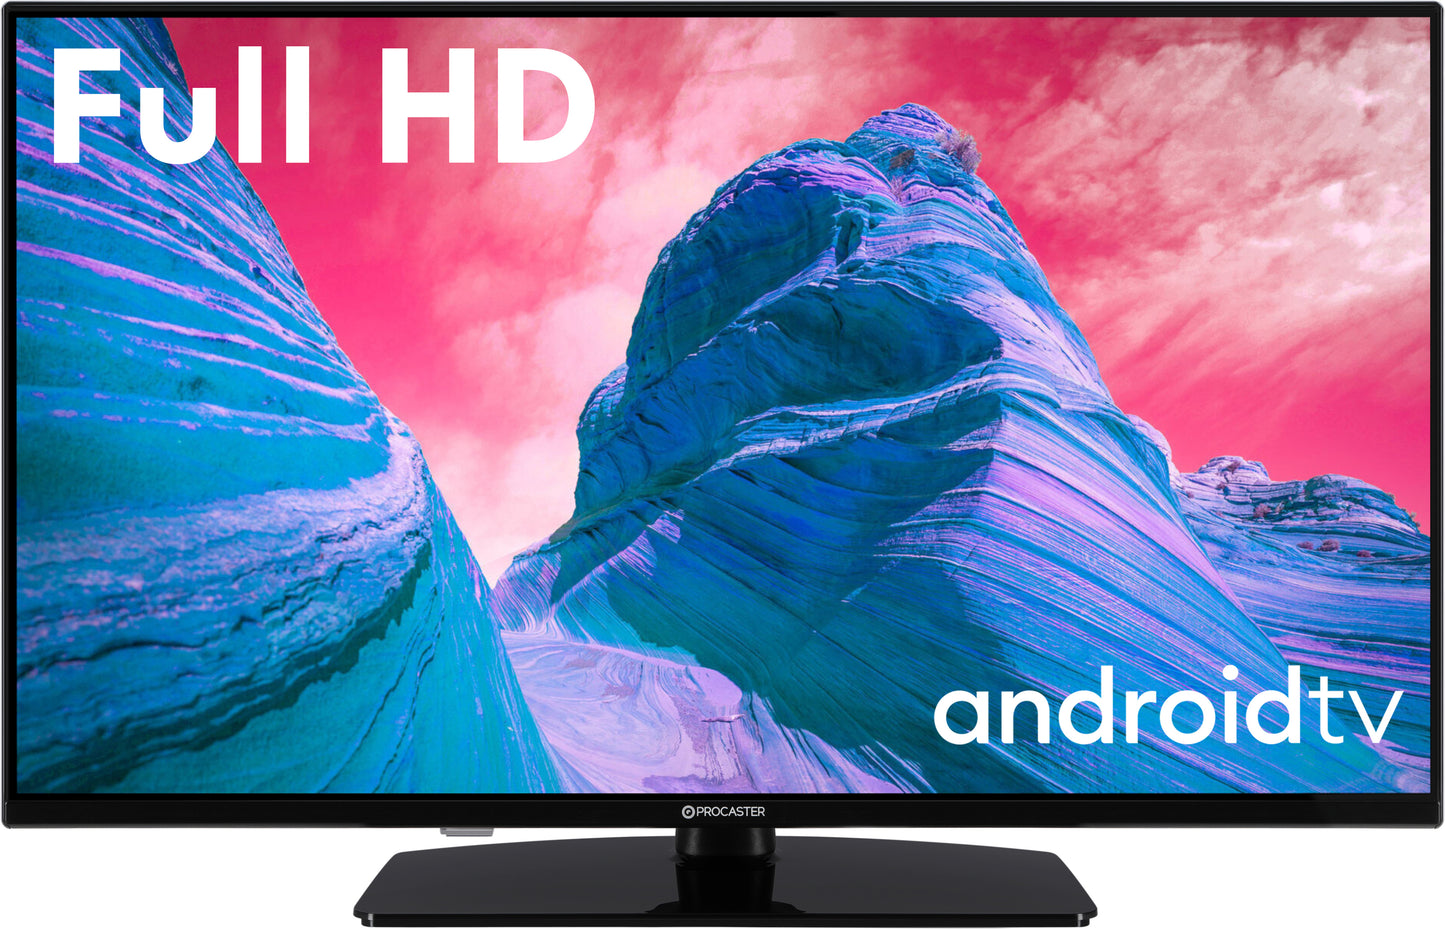 ProCaster LE-40SL702H 40" Full HD Android LED-TV